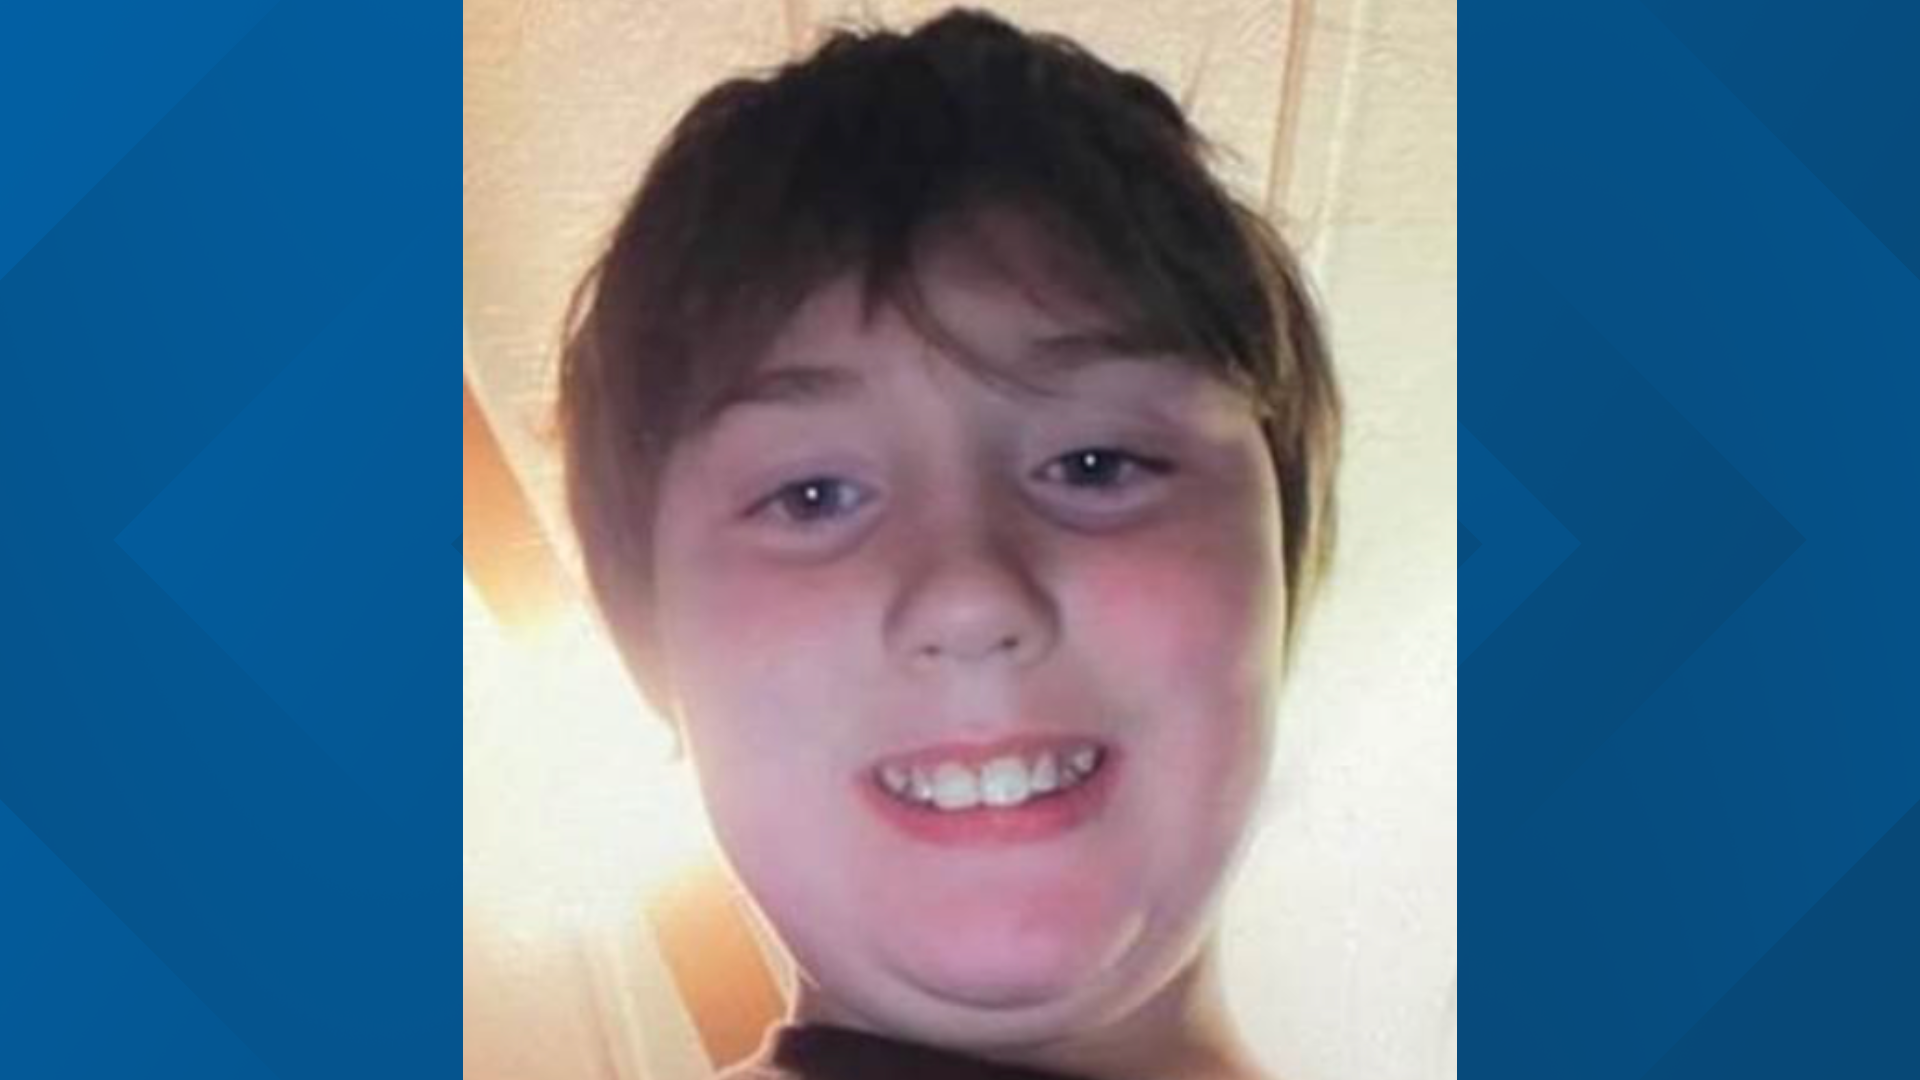 The visitation for the boy who went missing just before his 11th birthday will be Friday night in Marshalltown. His funeral will be Saturday.